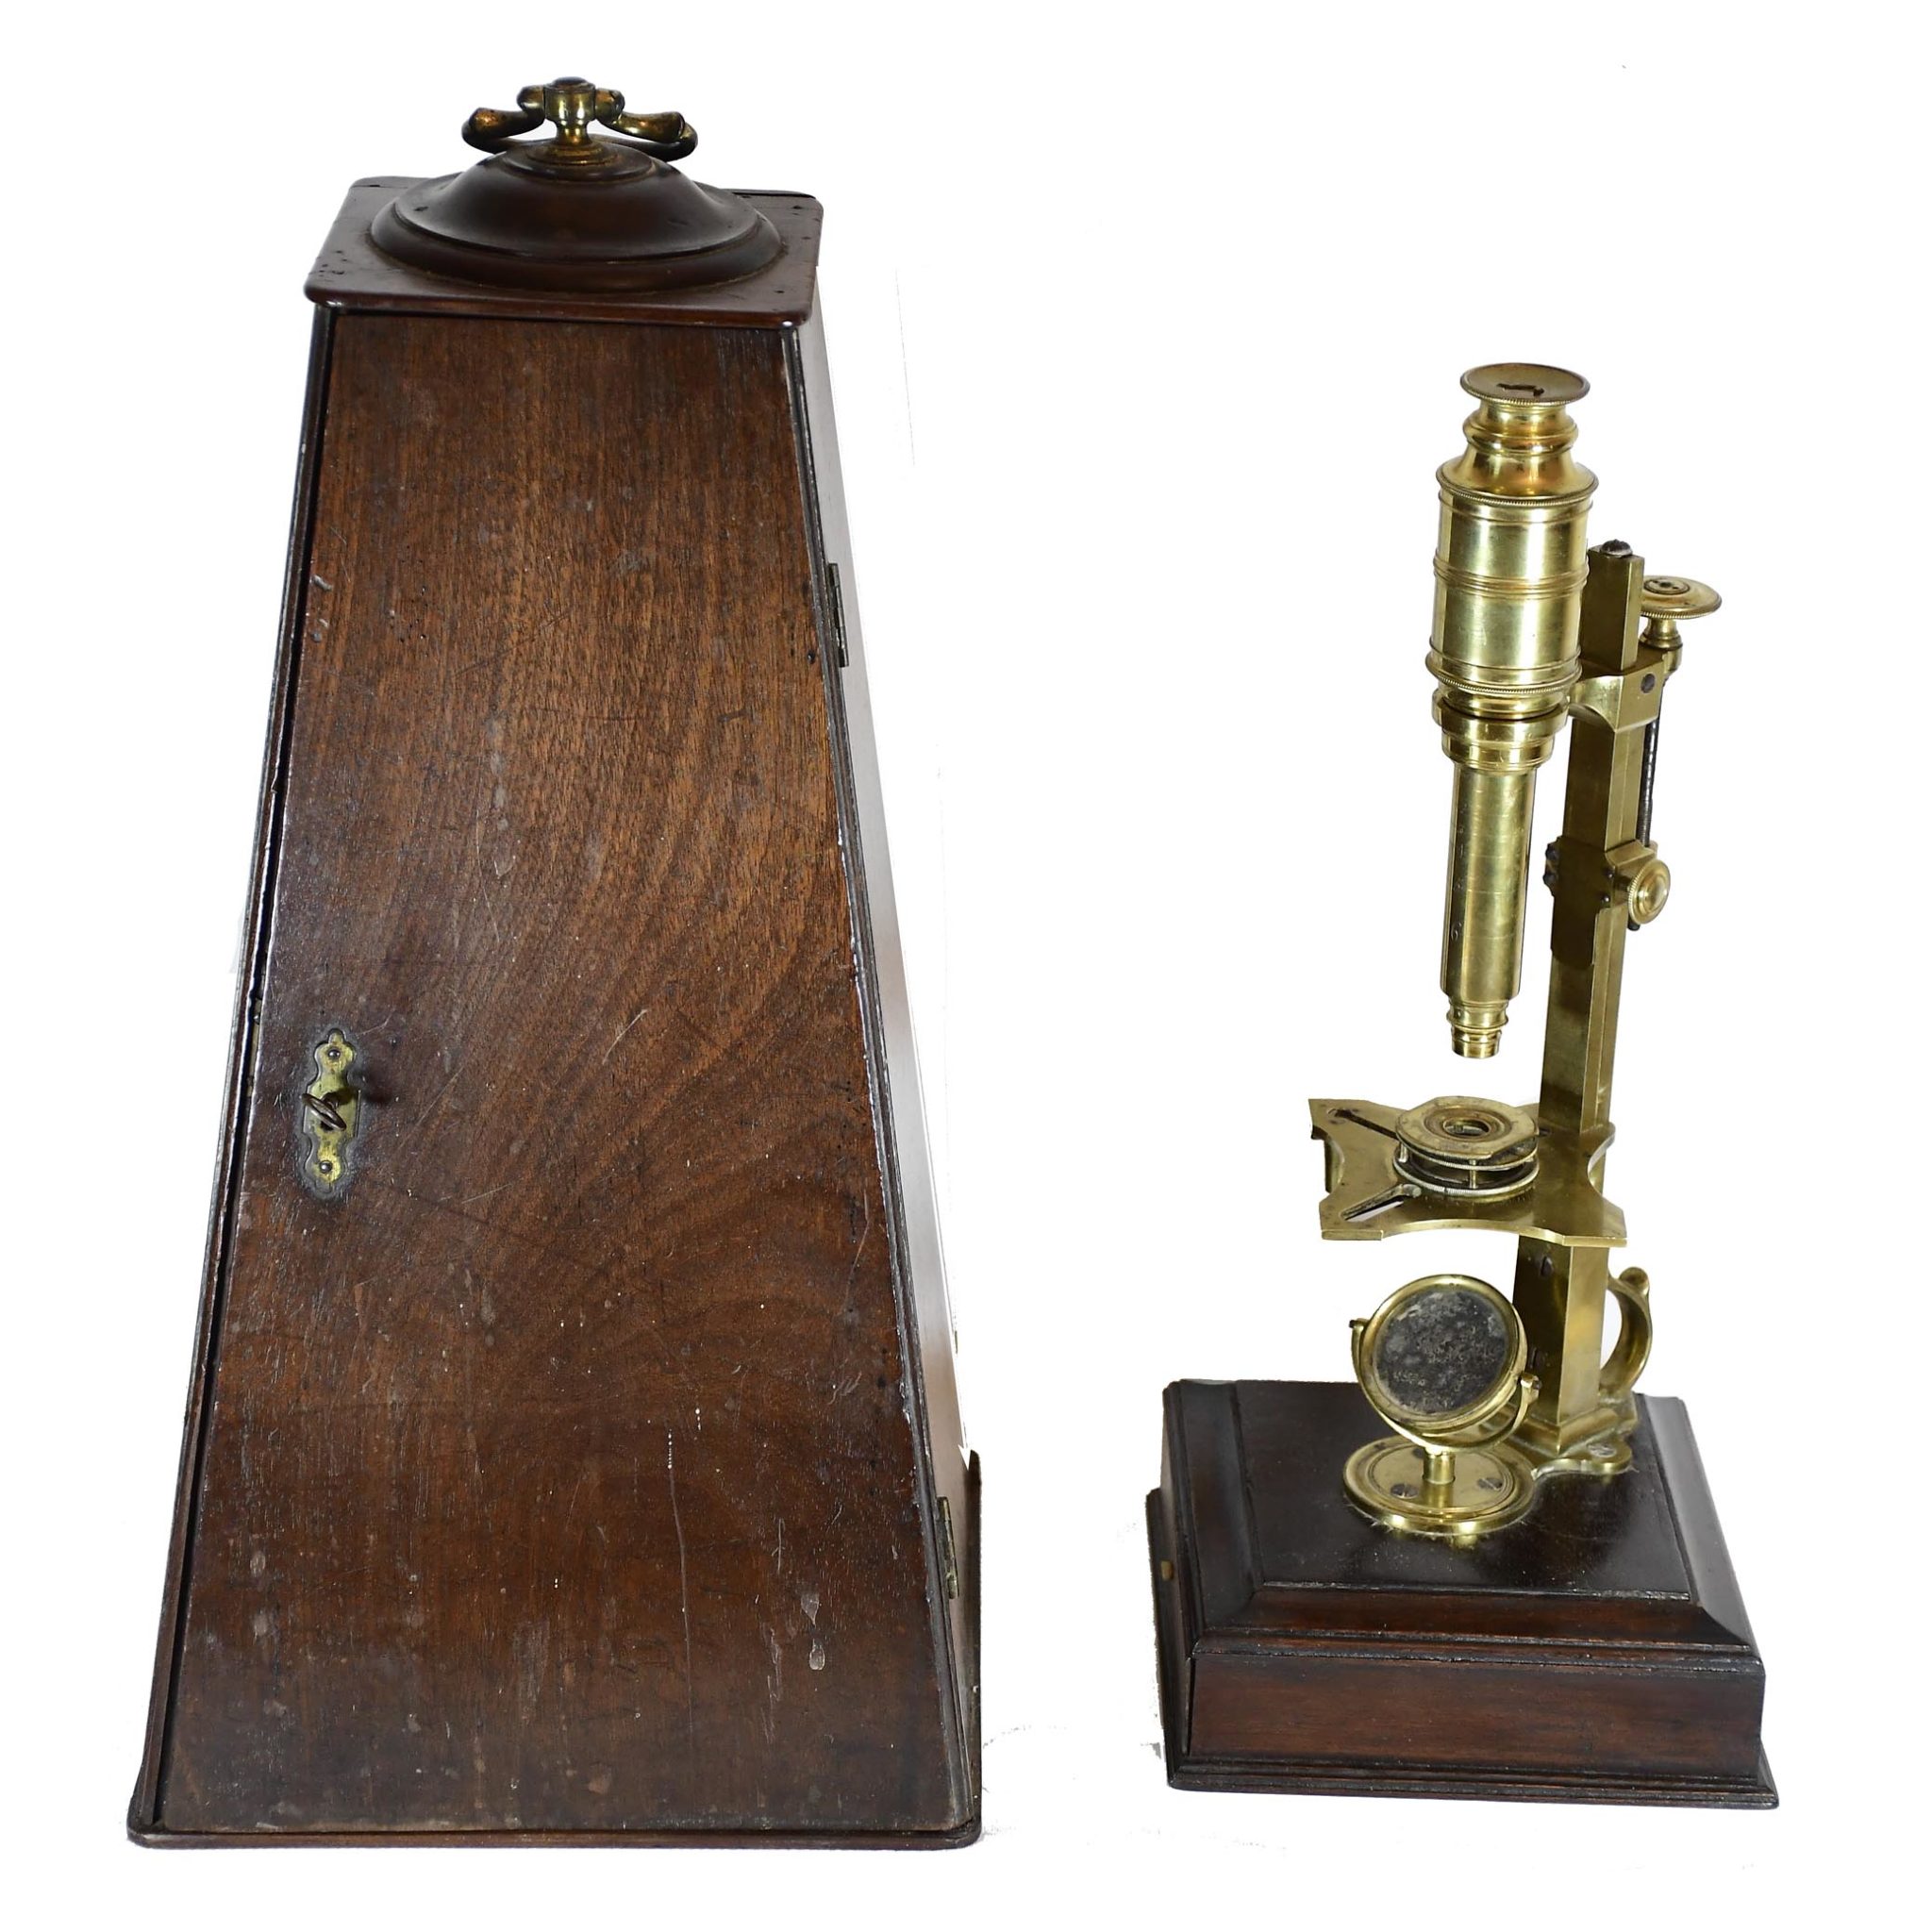 Cuff type Microscope by Peter Dollond, ca. 1750-60